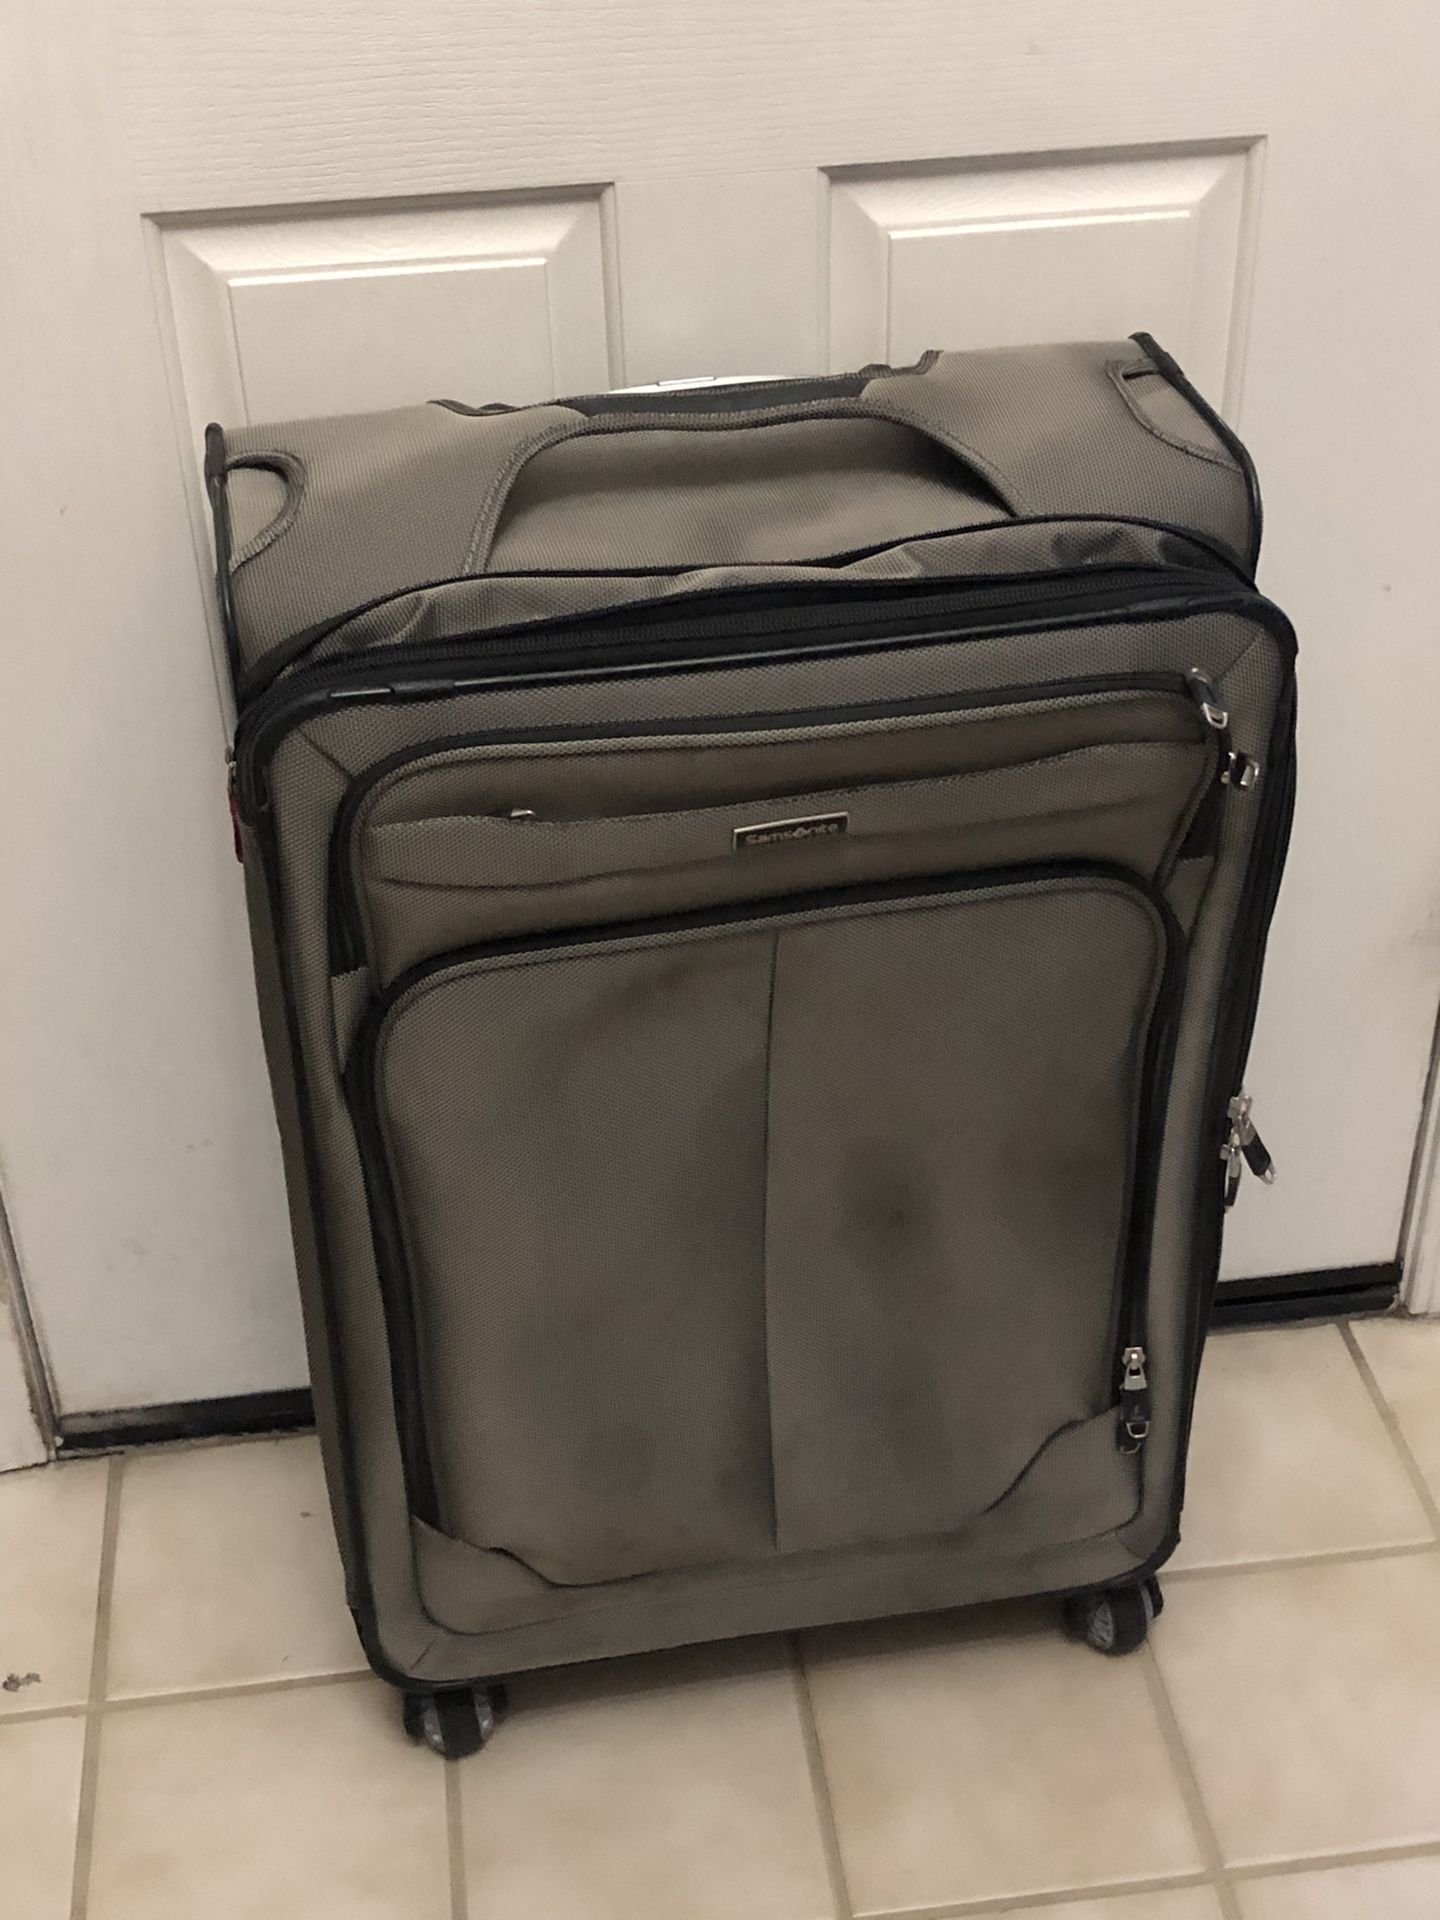 New Samsonite Luggage 28 Inch Spinner Upright Suitcase Bag